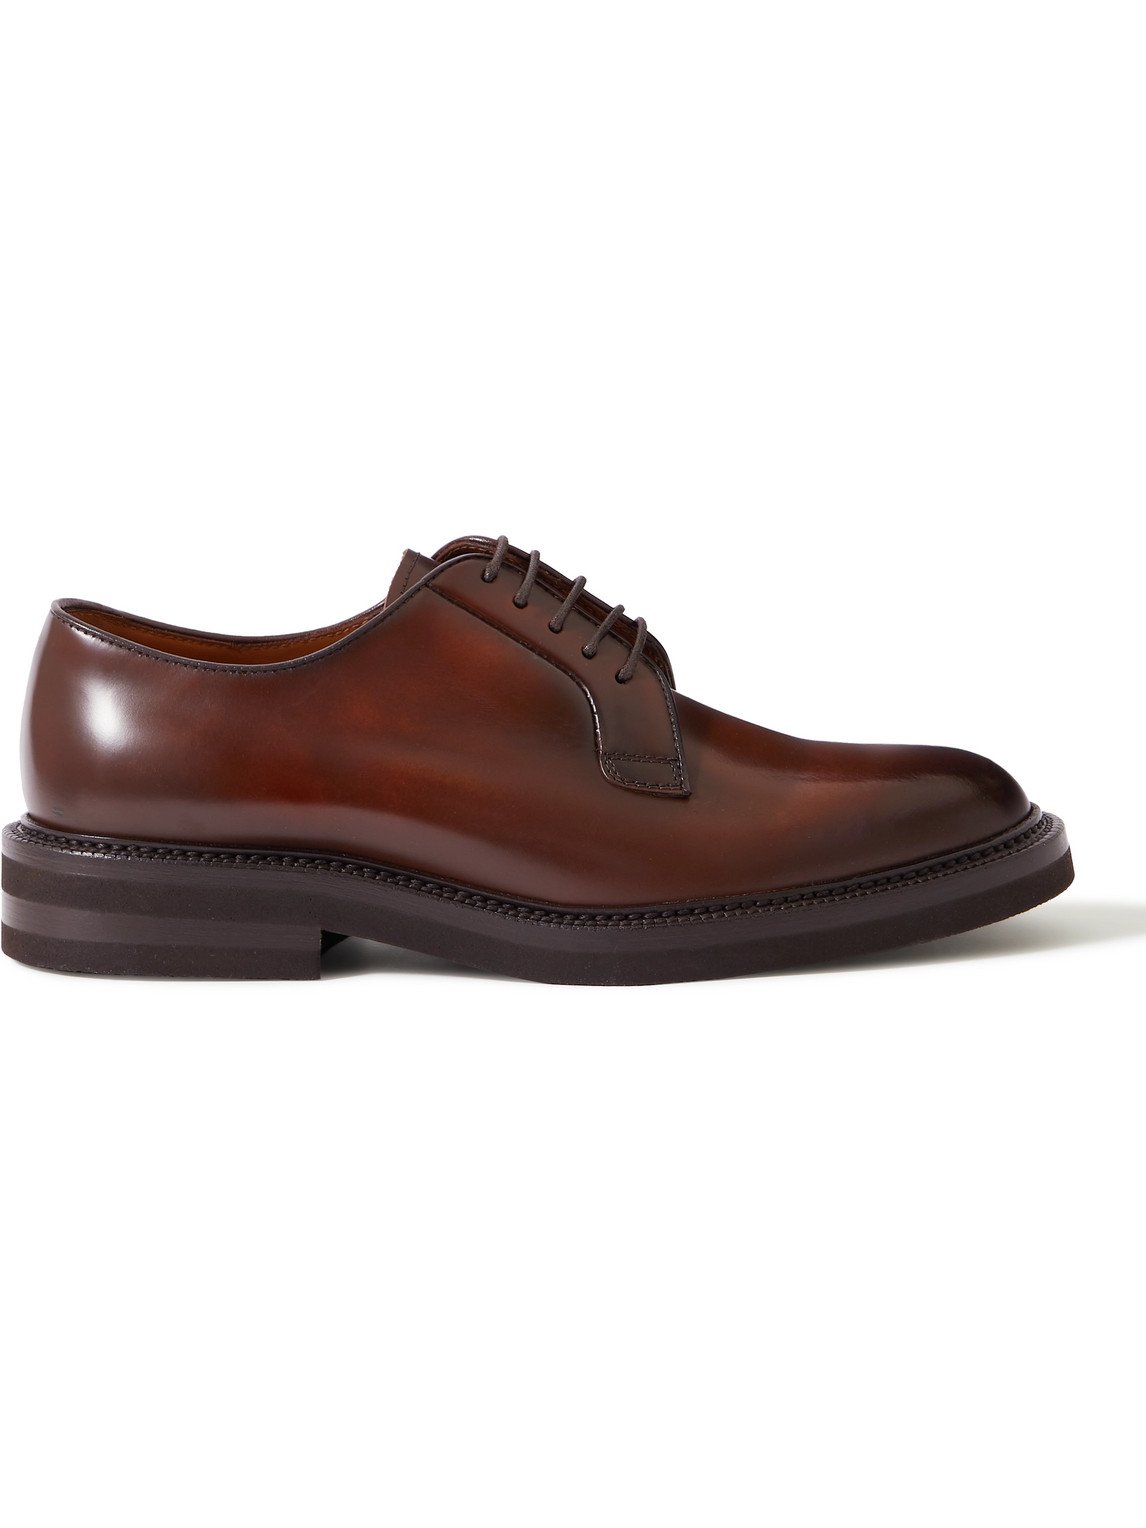 BRUNELLO CUCINELLI LEATHER DERBY SHOES